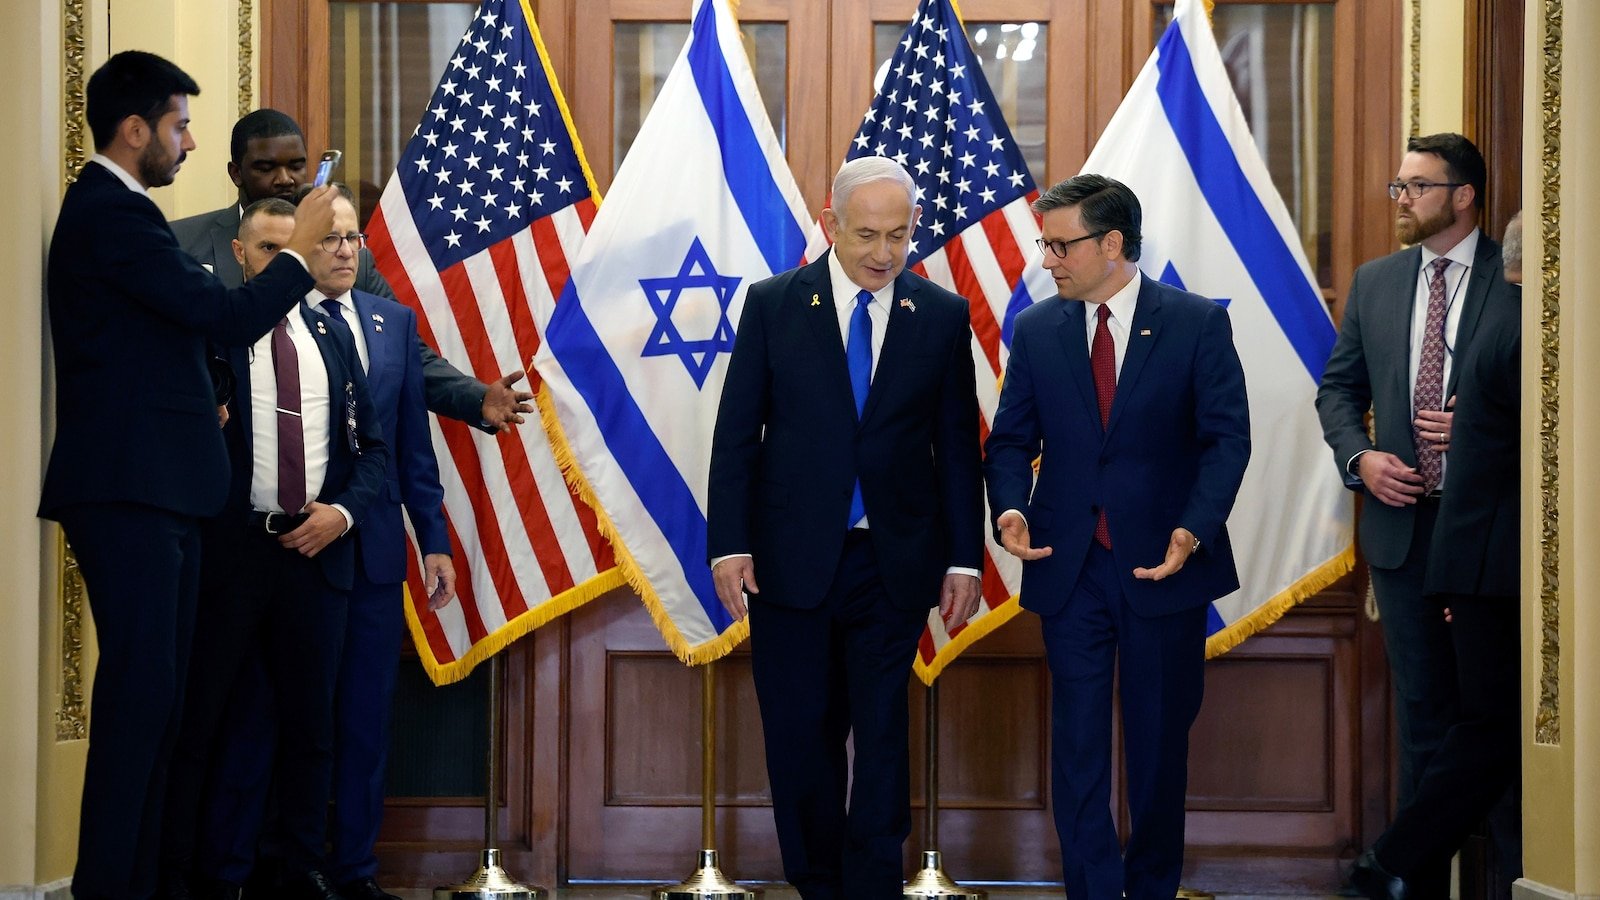 Netanyahu to speak to Congress amid political tensions in US, Israel over war in Gaza